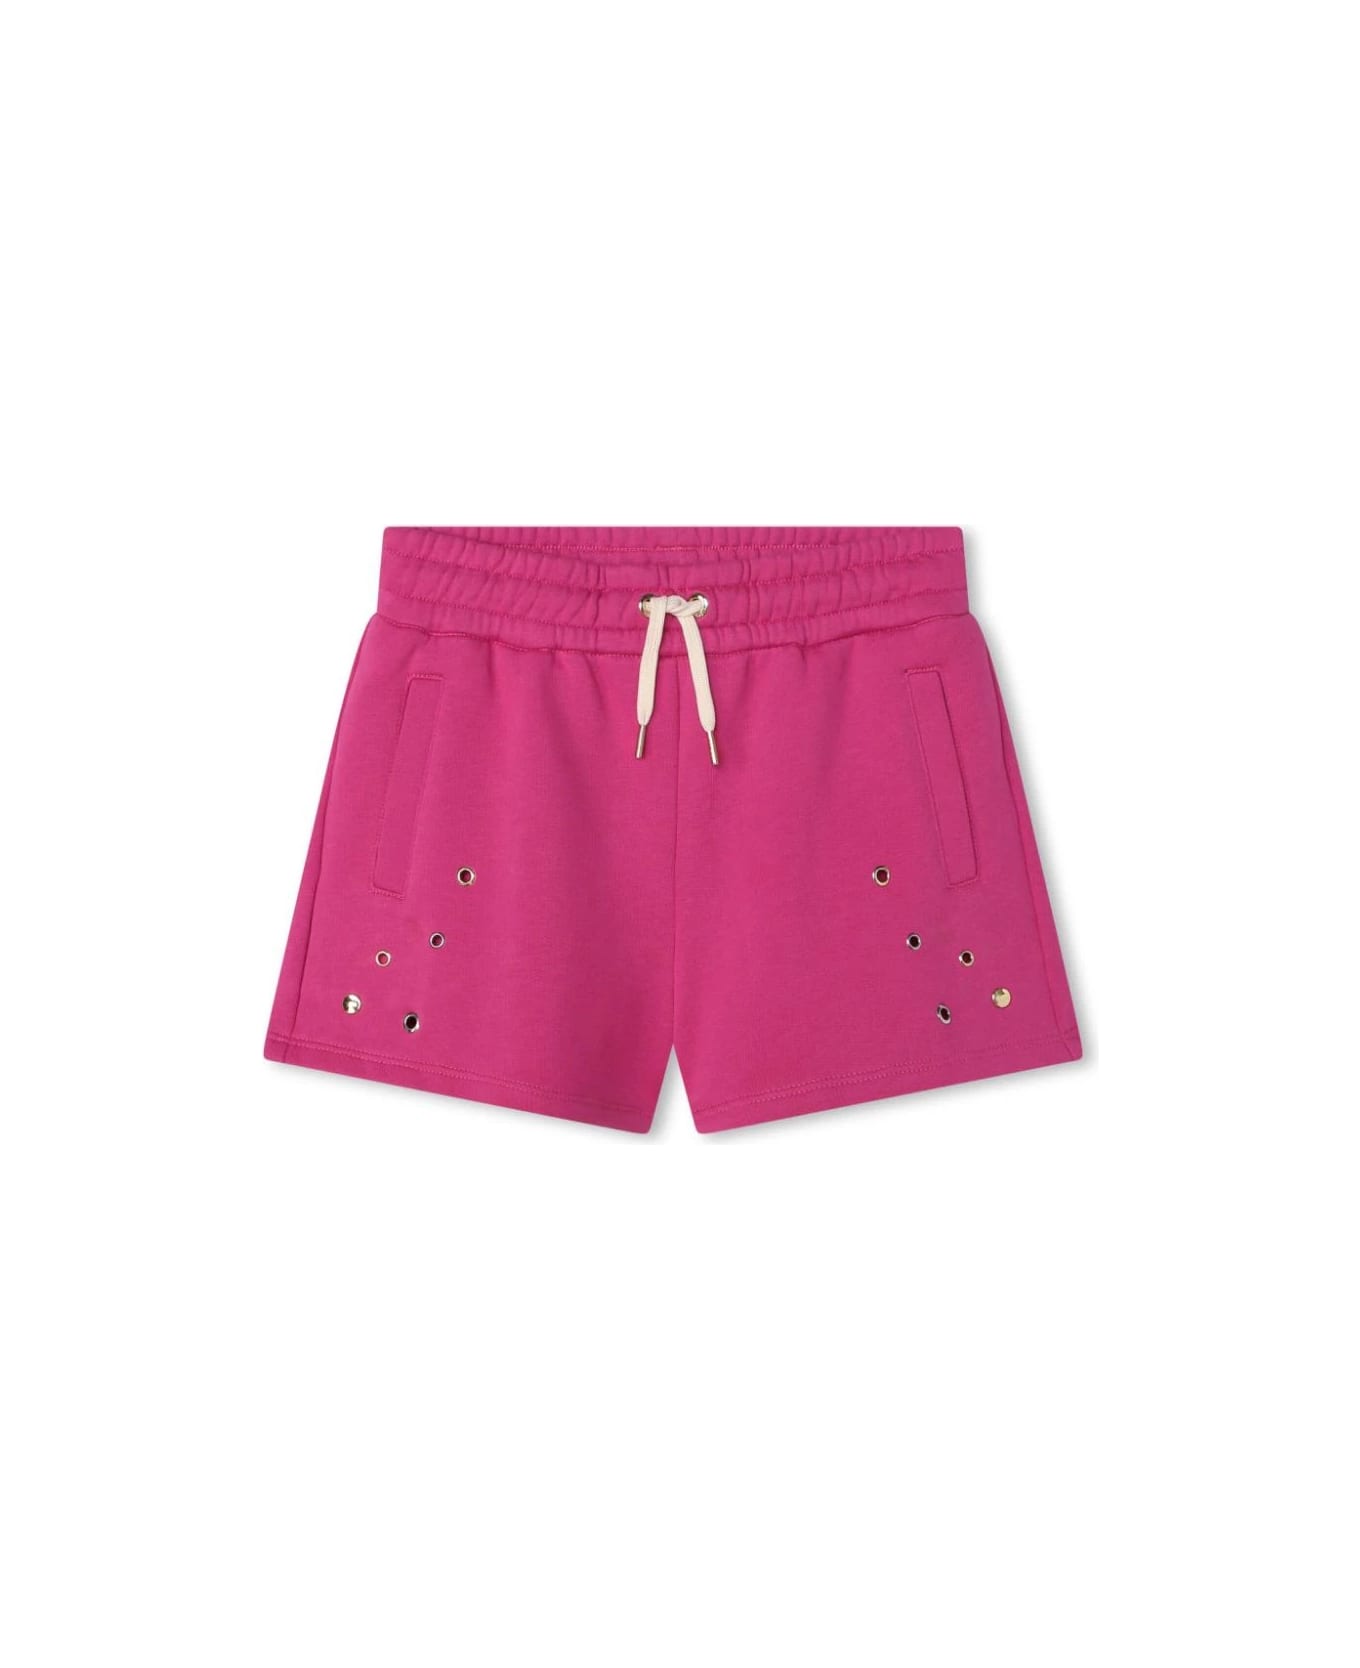 Chloé Fuchsia Sporty Shorts With Studs - Pink